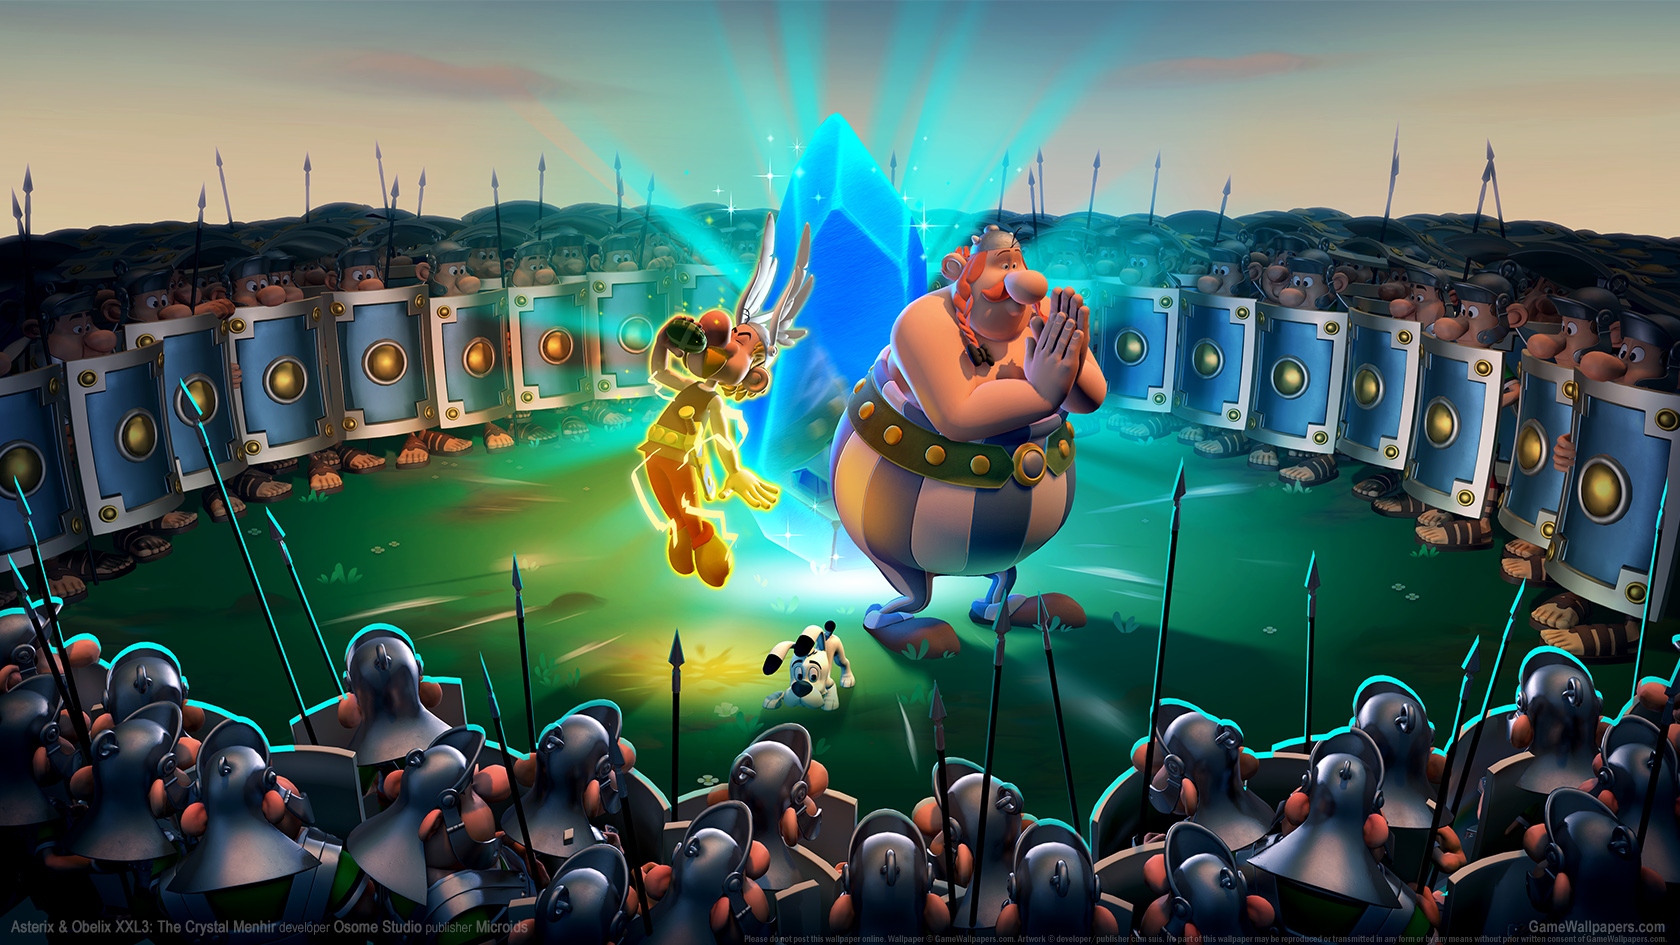 Asterix & Obelix XXL3: The Crystal Menhir 1680x945 wallpaper or background 01